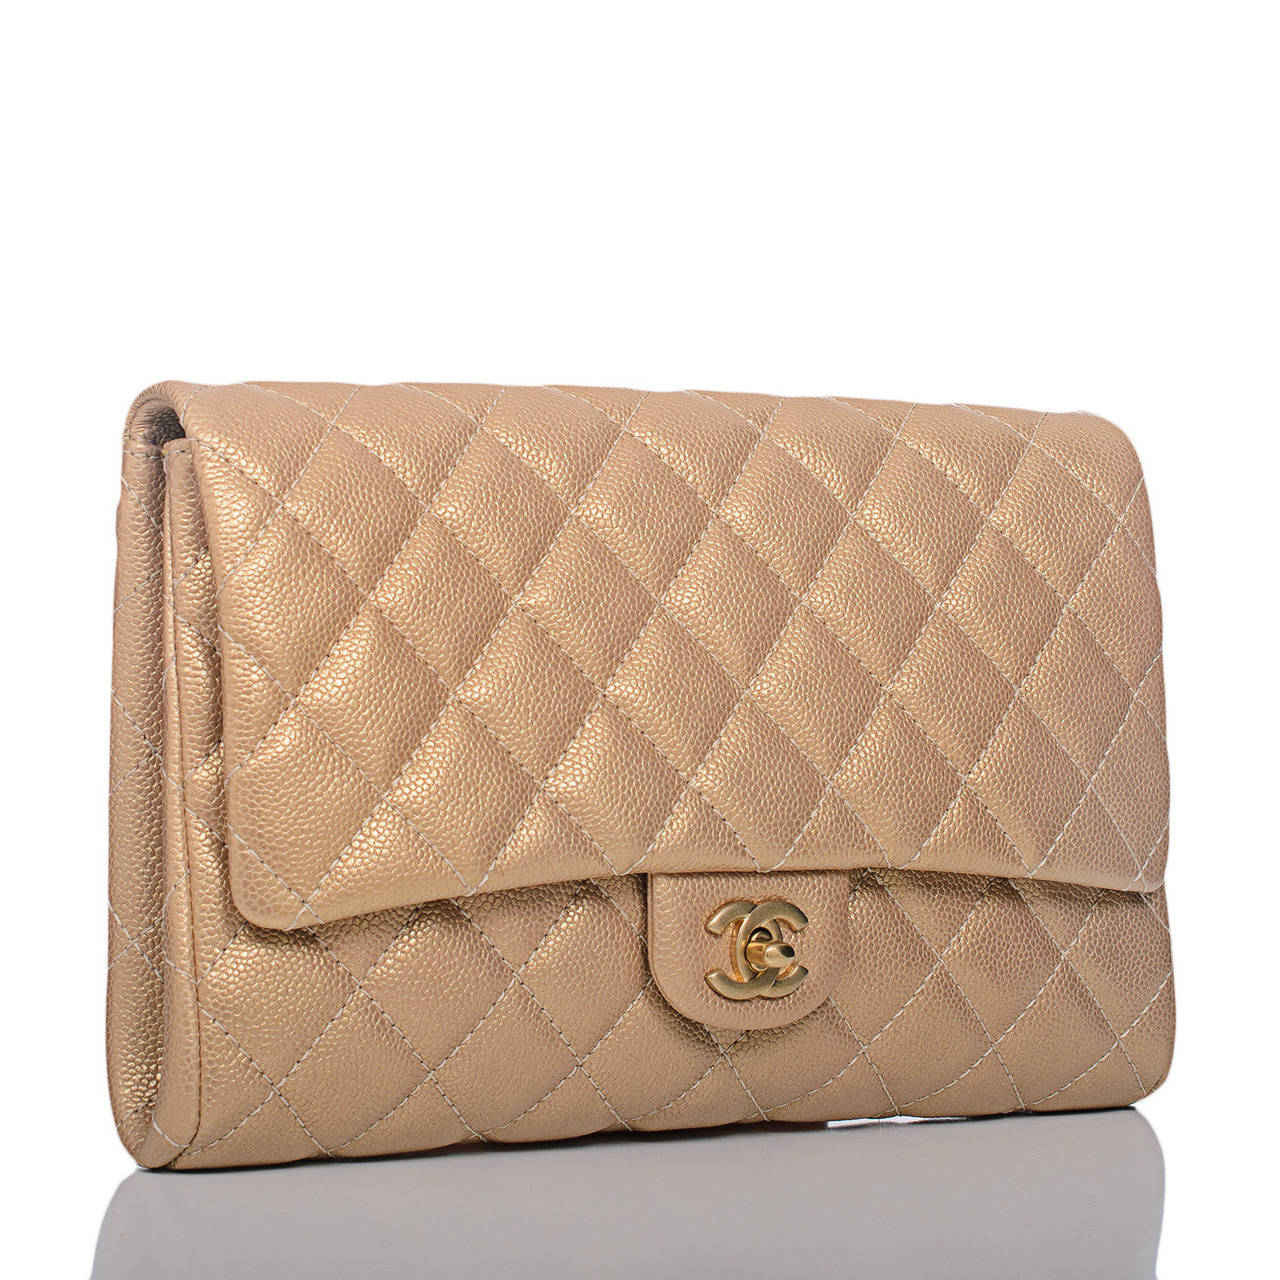 This New Clutch style features quilted gold caviar, front flap with CC turnlock closure, rear envelope pocket and interwoven gold leather and antique matte gold tone metal chain link shoulder strap that can be put inside and worn as a clutch.

The